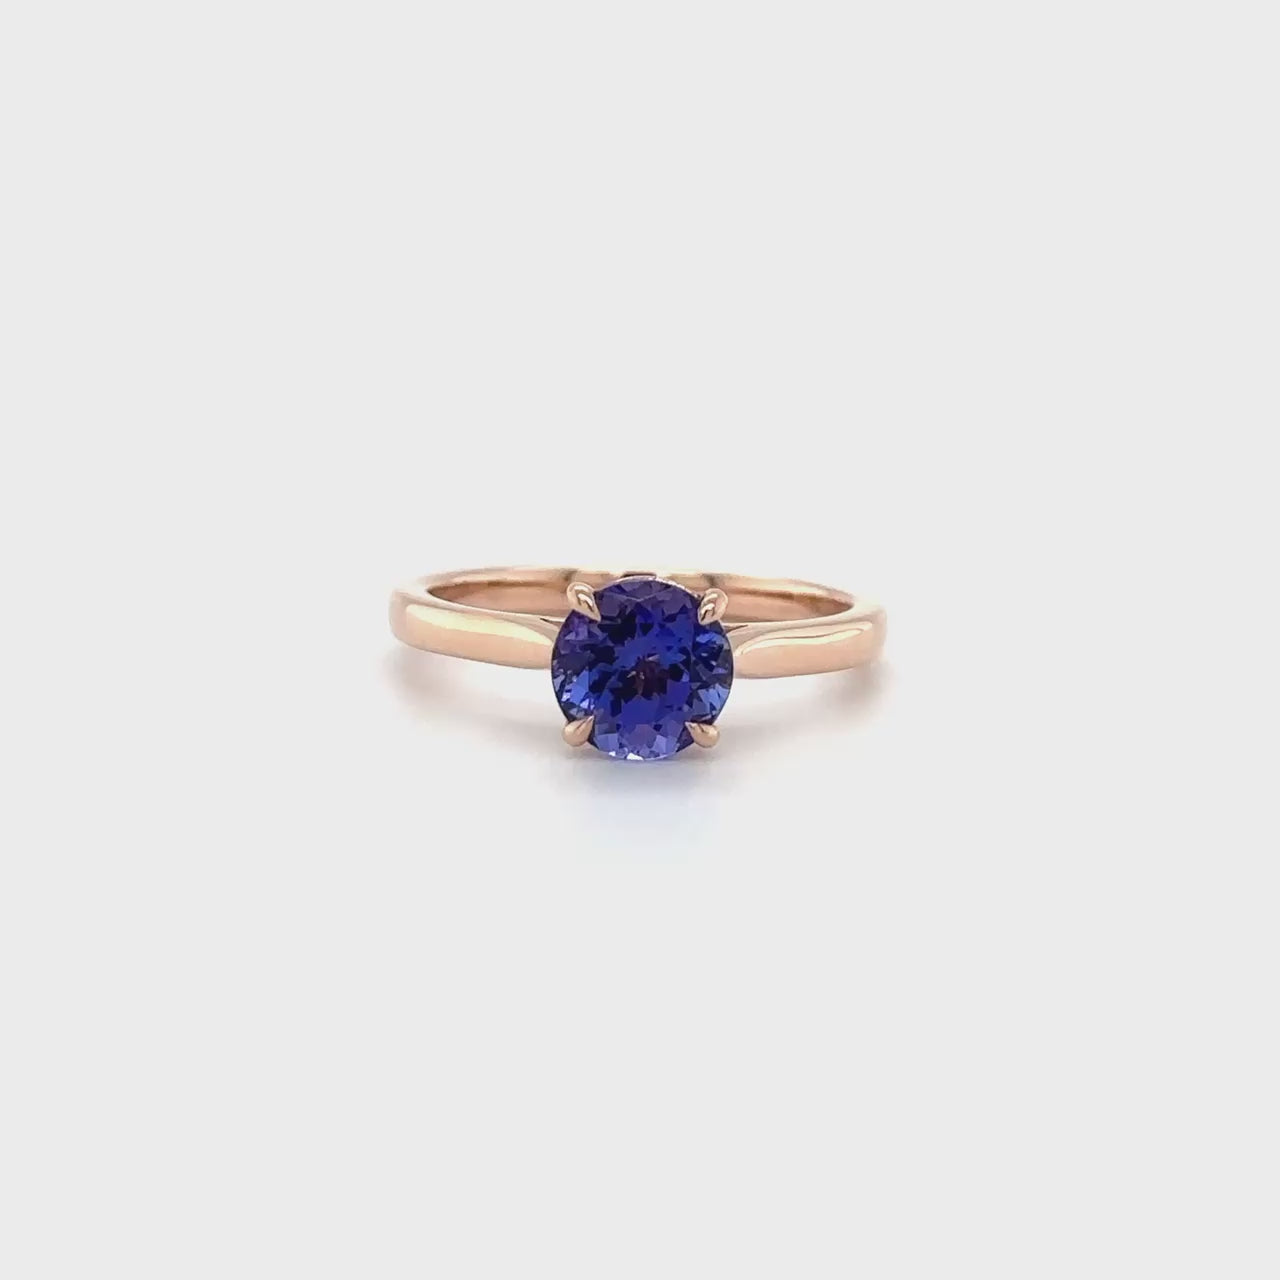 A, stunning, round, solitaire, tanzanite, ring, featuring, a, beautiful, violet-blue, gemstone, set, in, lustrous, sterling, silver, , Perfect, for, adding, a, touch, of, elegance, to, any, ensemble, , Ideal, for, everyday, wear, or, special, occasions, , Exquisite, craftsmanship, meets, timeless, beauty, in, this, captivating, piece, of, jewelry.